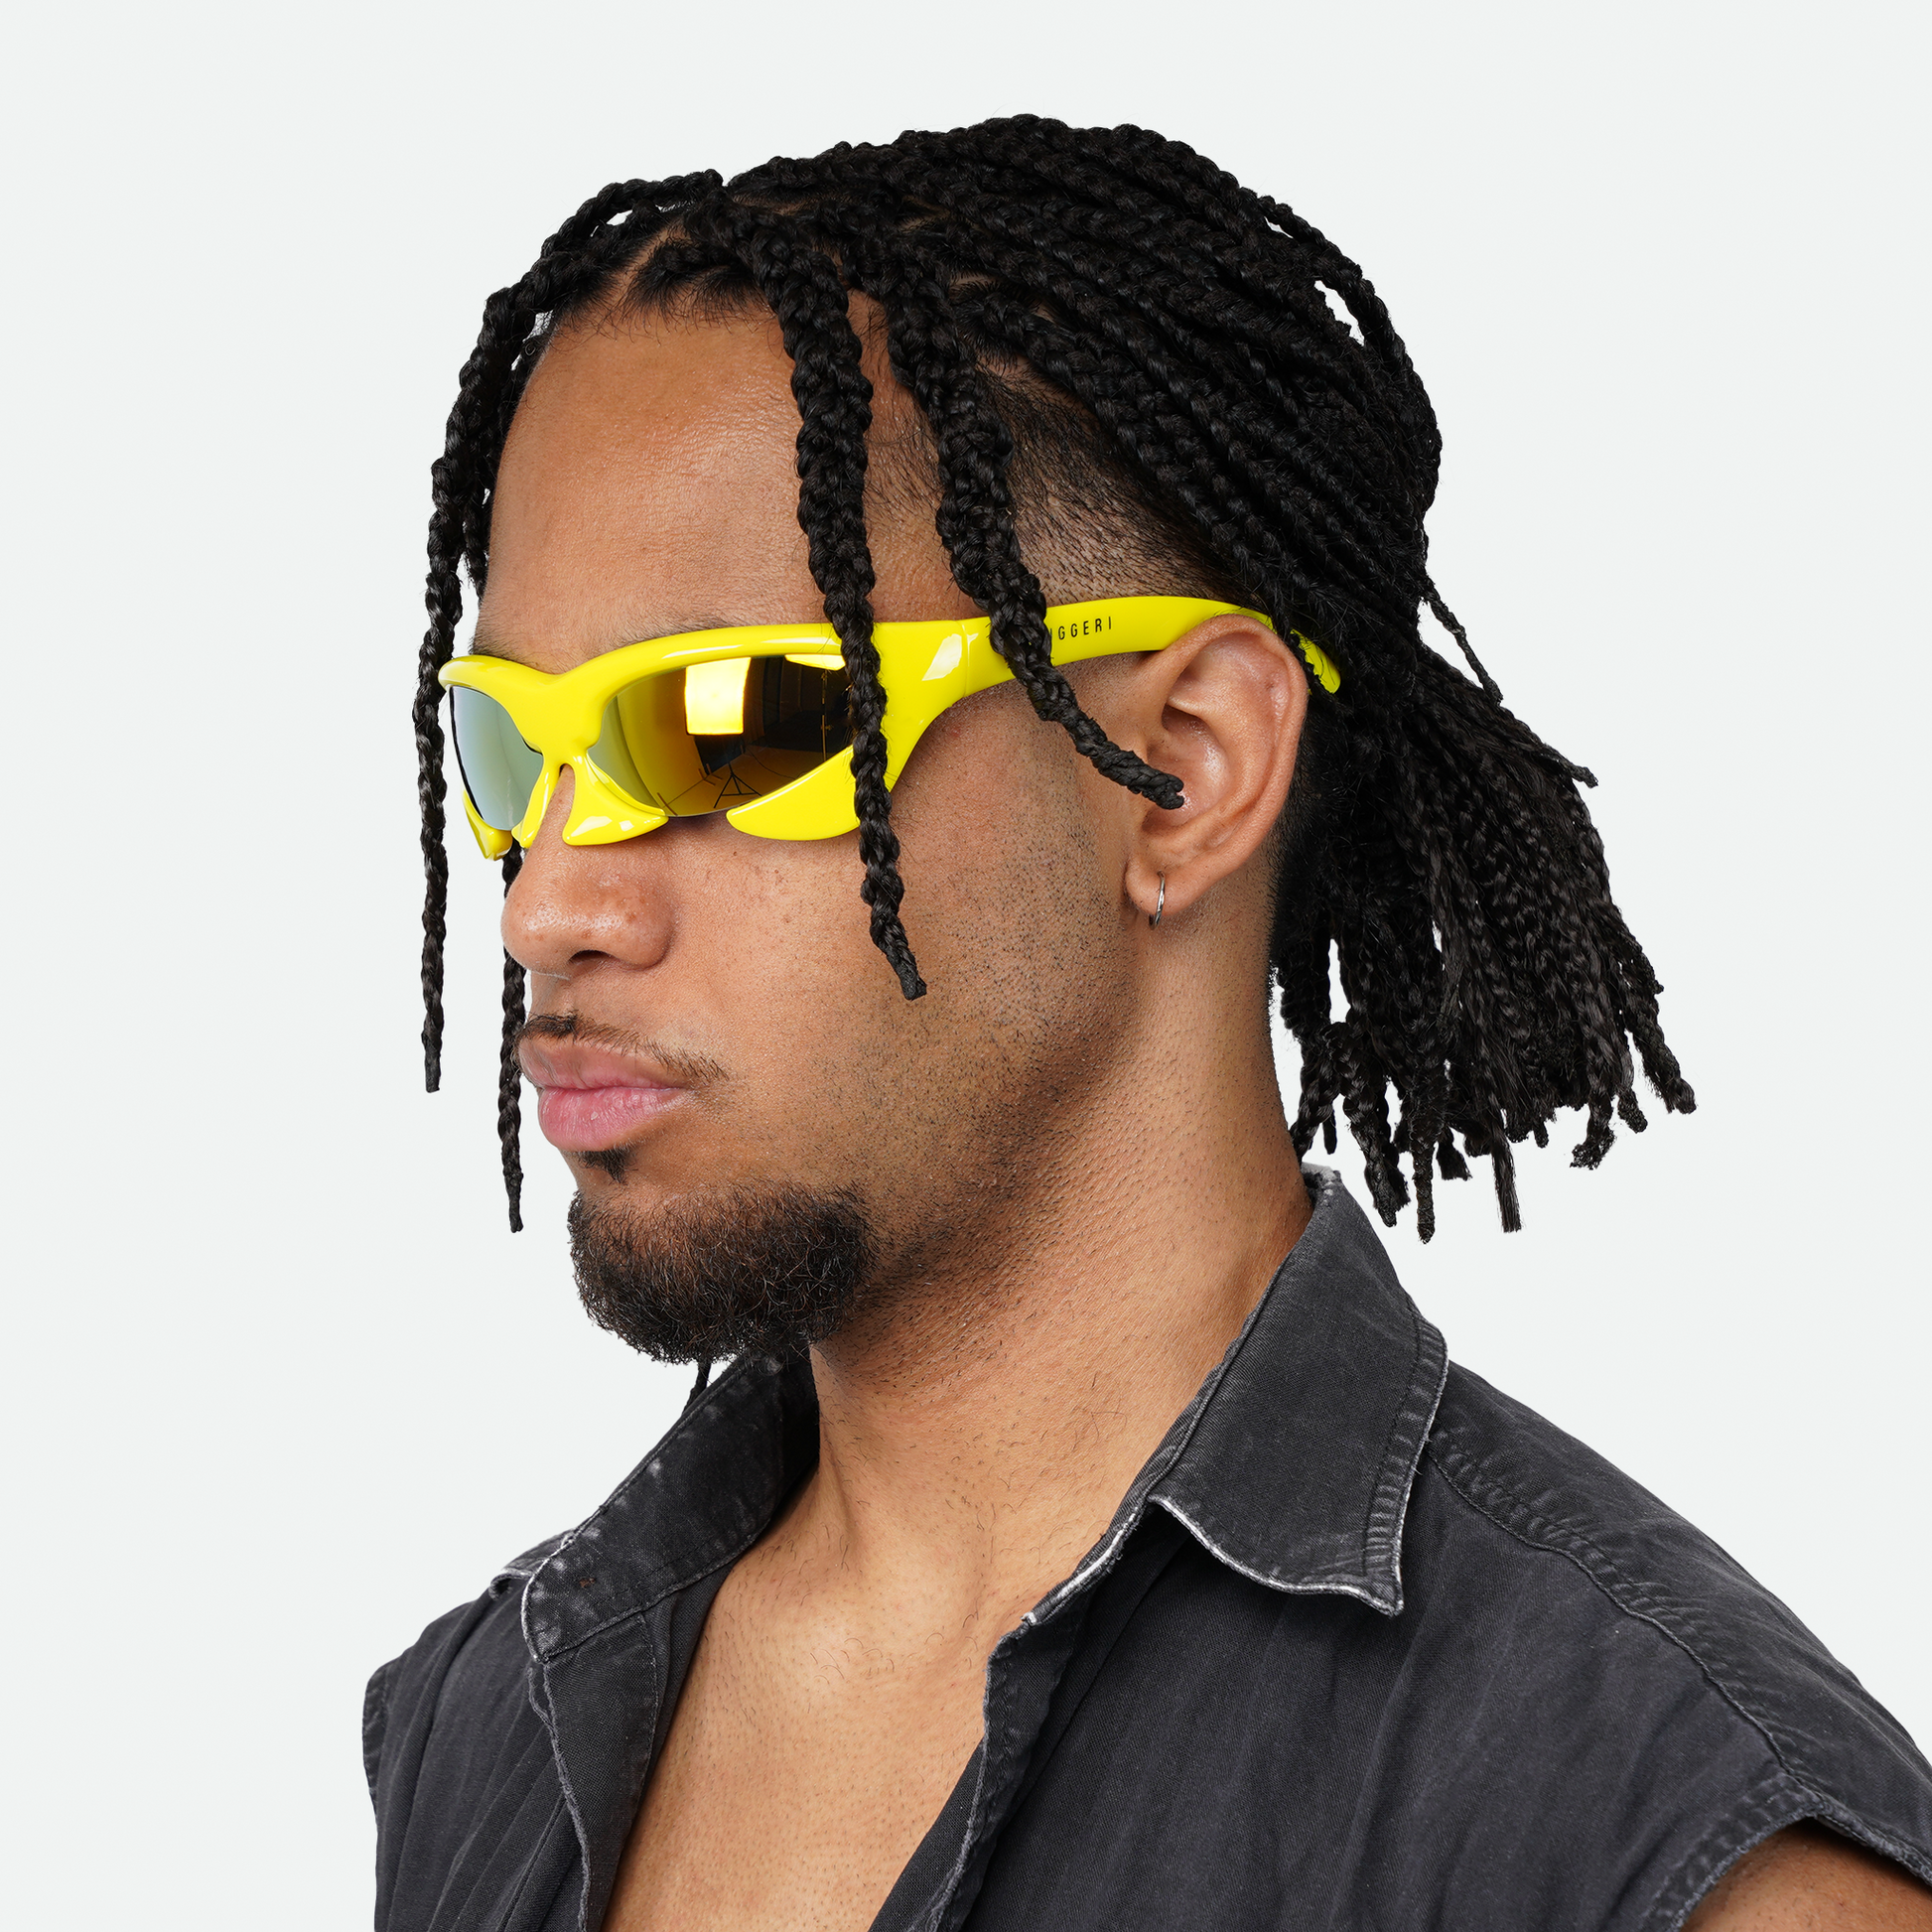 Male model showcasing Ruggeri Carapace sunglasses with eye-catching yellow frames and dynamic blue/orange lenses, highlighting the sleek and bold custom-moulded insectoid design with Category 3 UV400 REVO lenses.